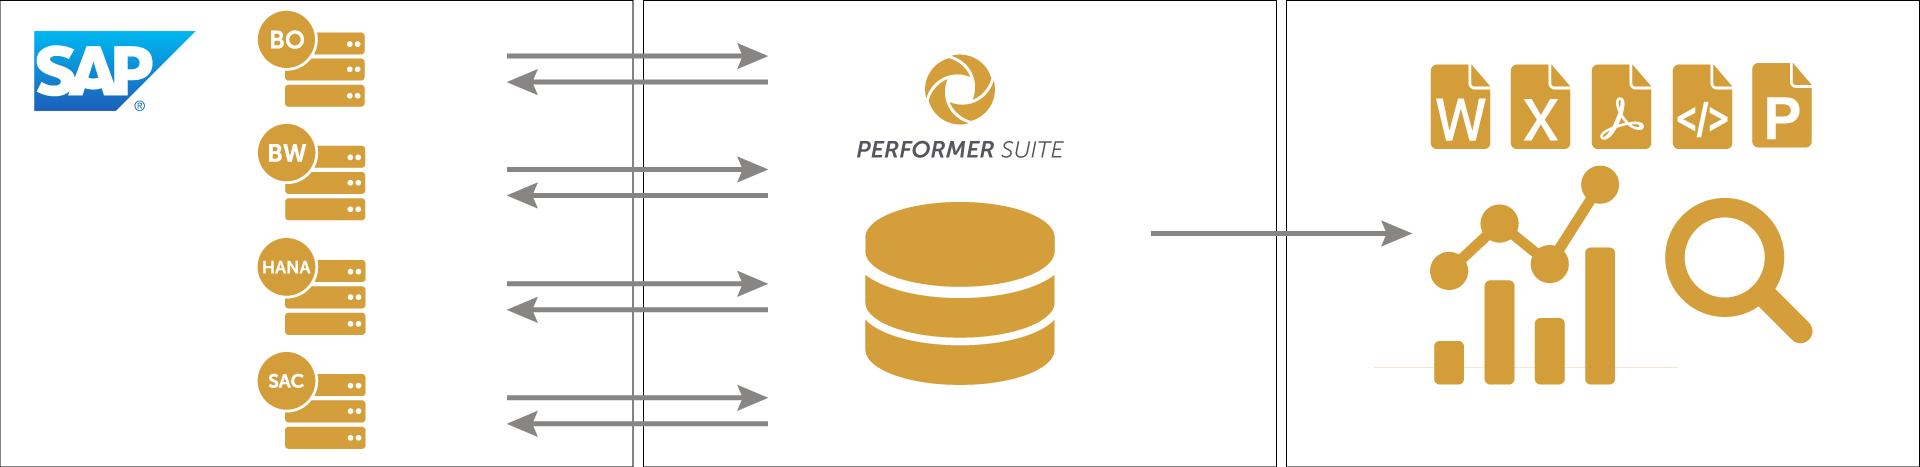 Performer Suite connects to SAP systems and generates analyses and documentations